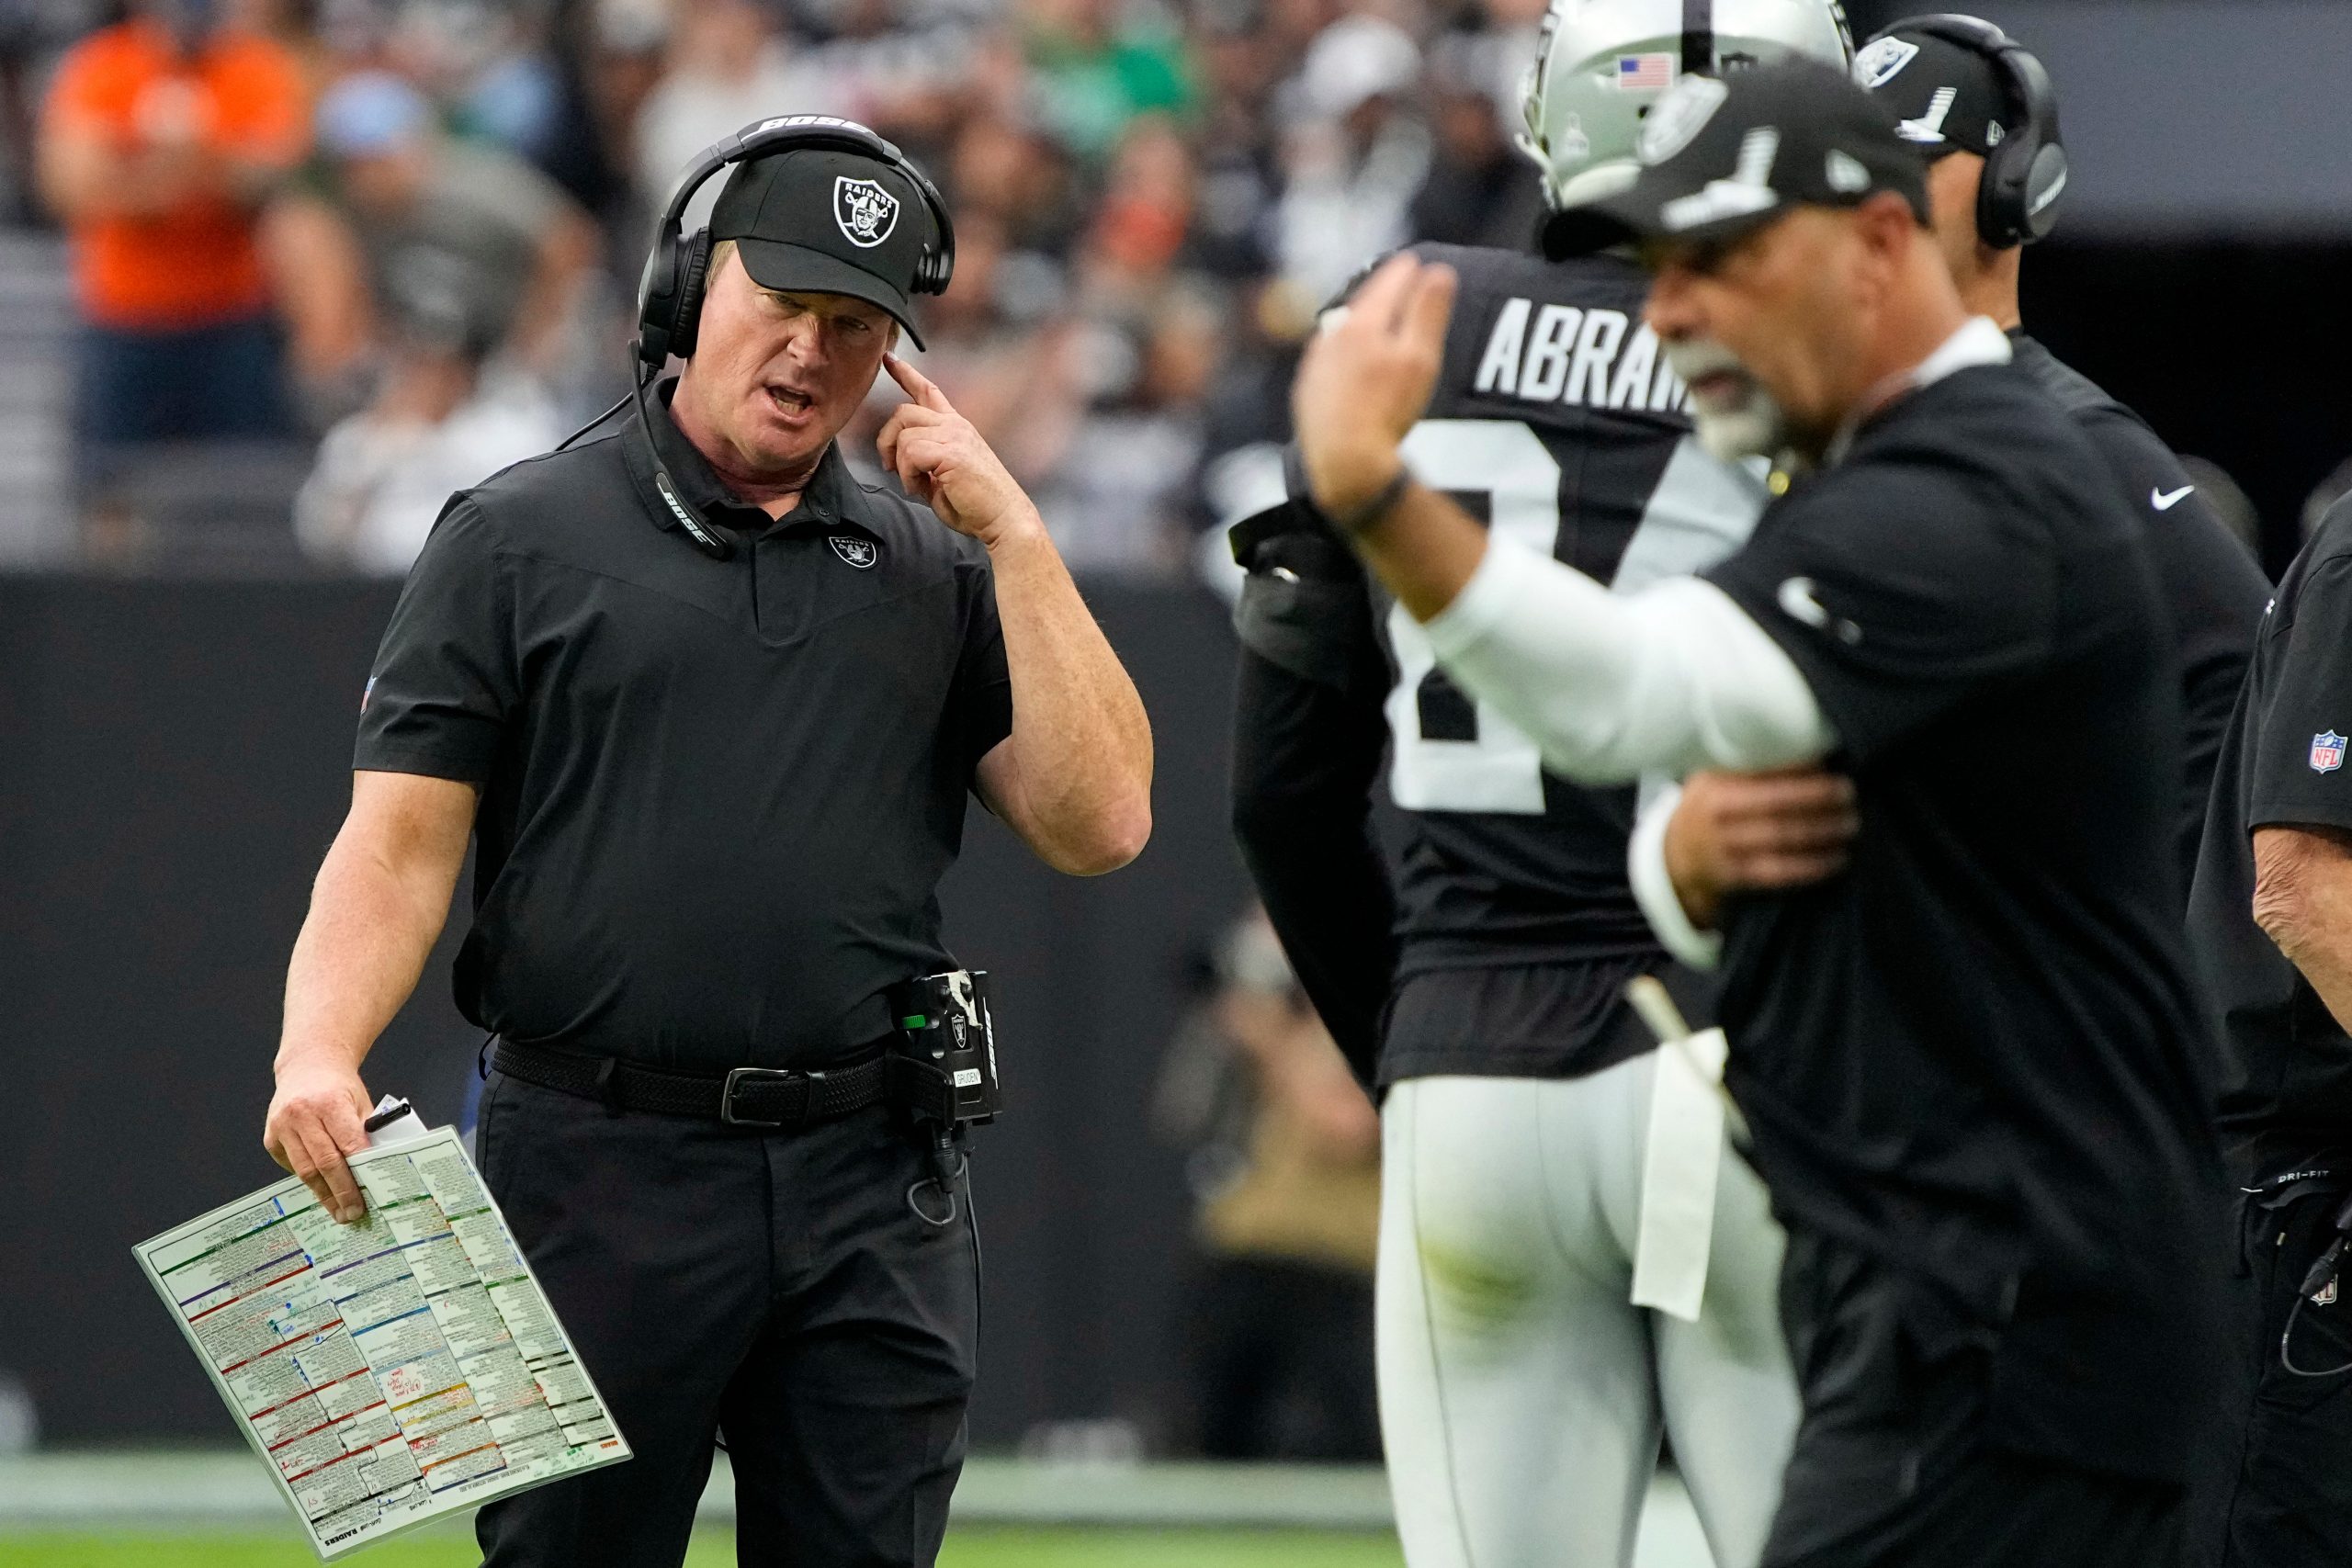 NFL: Raiders coach Jon Gruden out over offensive emails